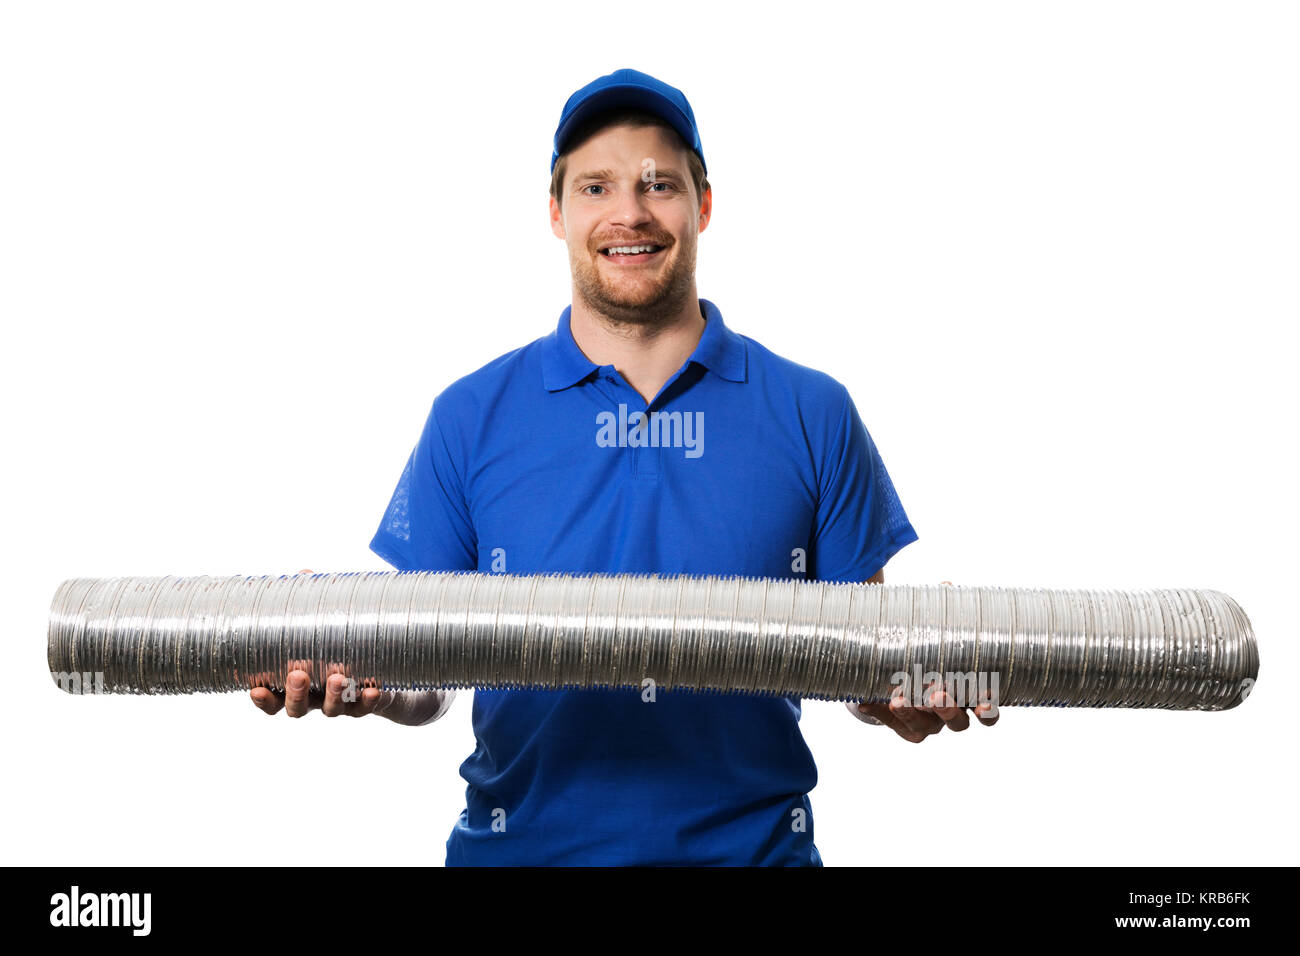 hvac worker with flexible ventilation system tube in hands Stock Photo